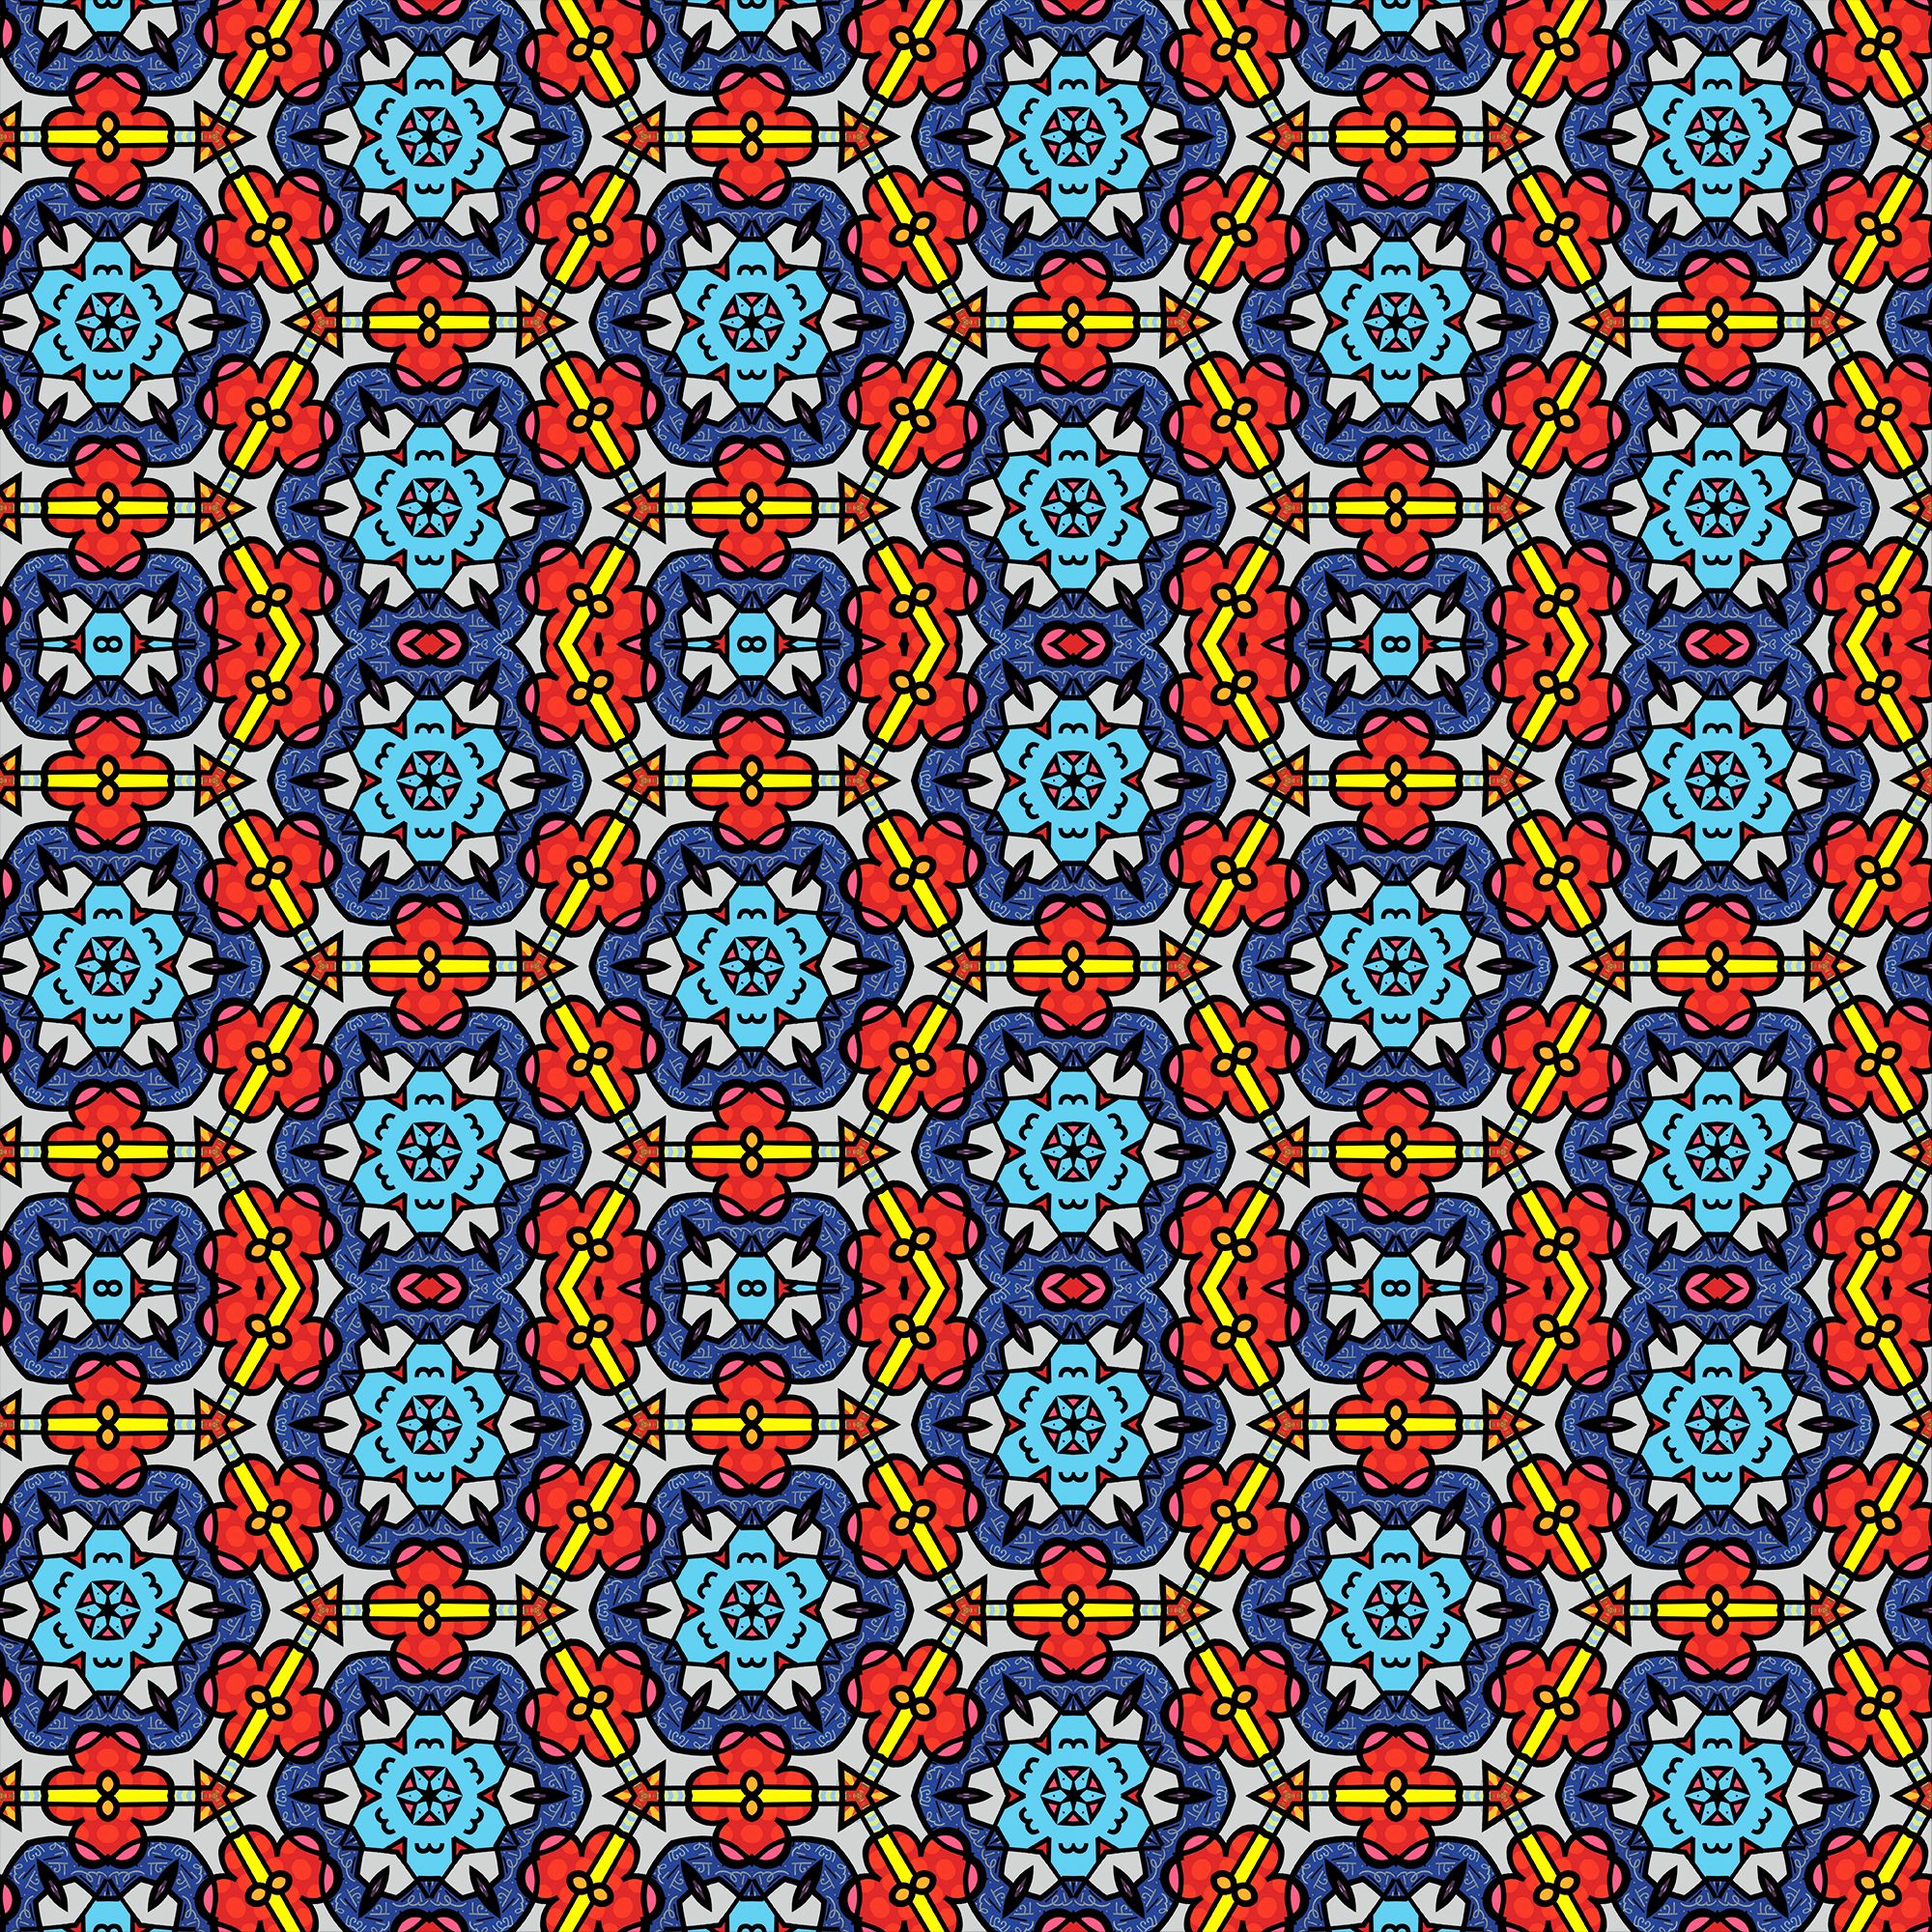 kaleidoscope, forms, patterns, multicolored, motley, texture, textures, form 2160p